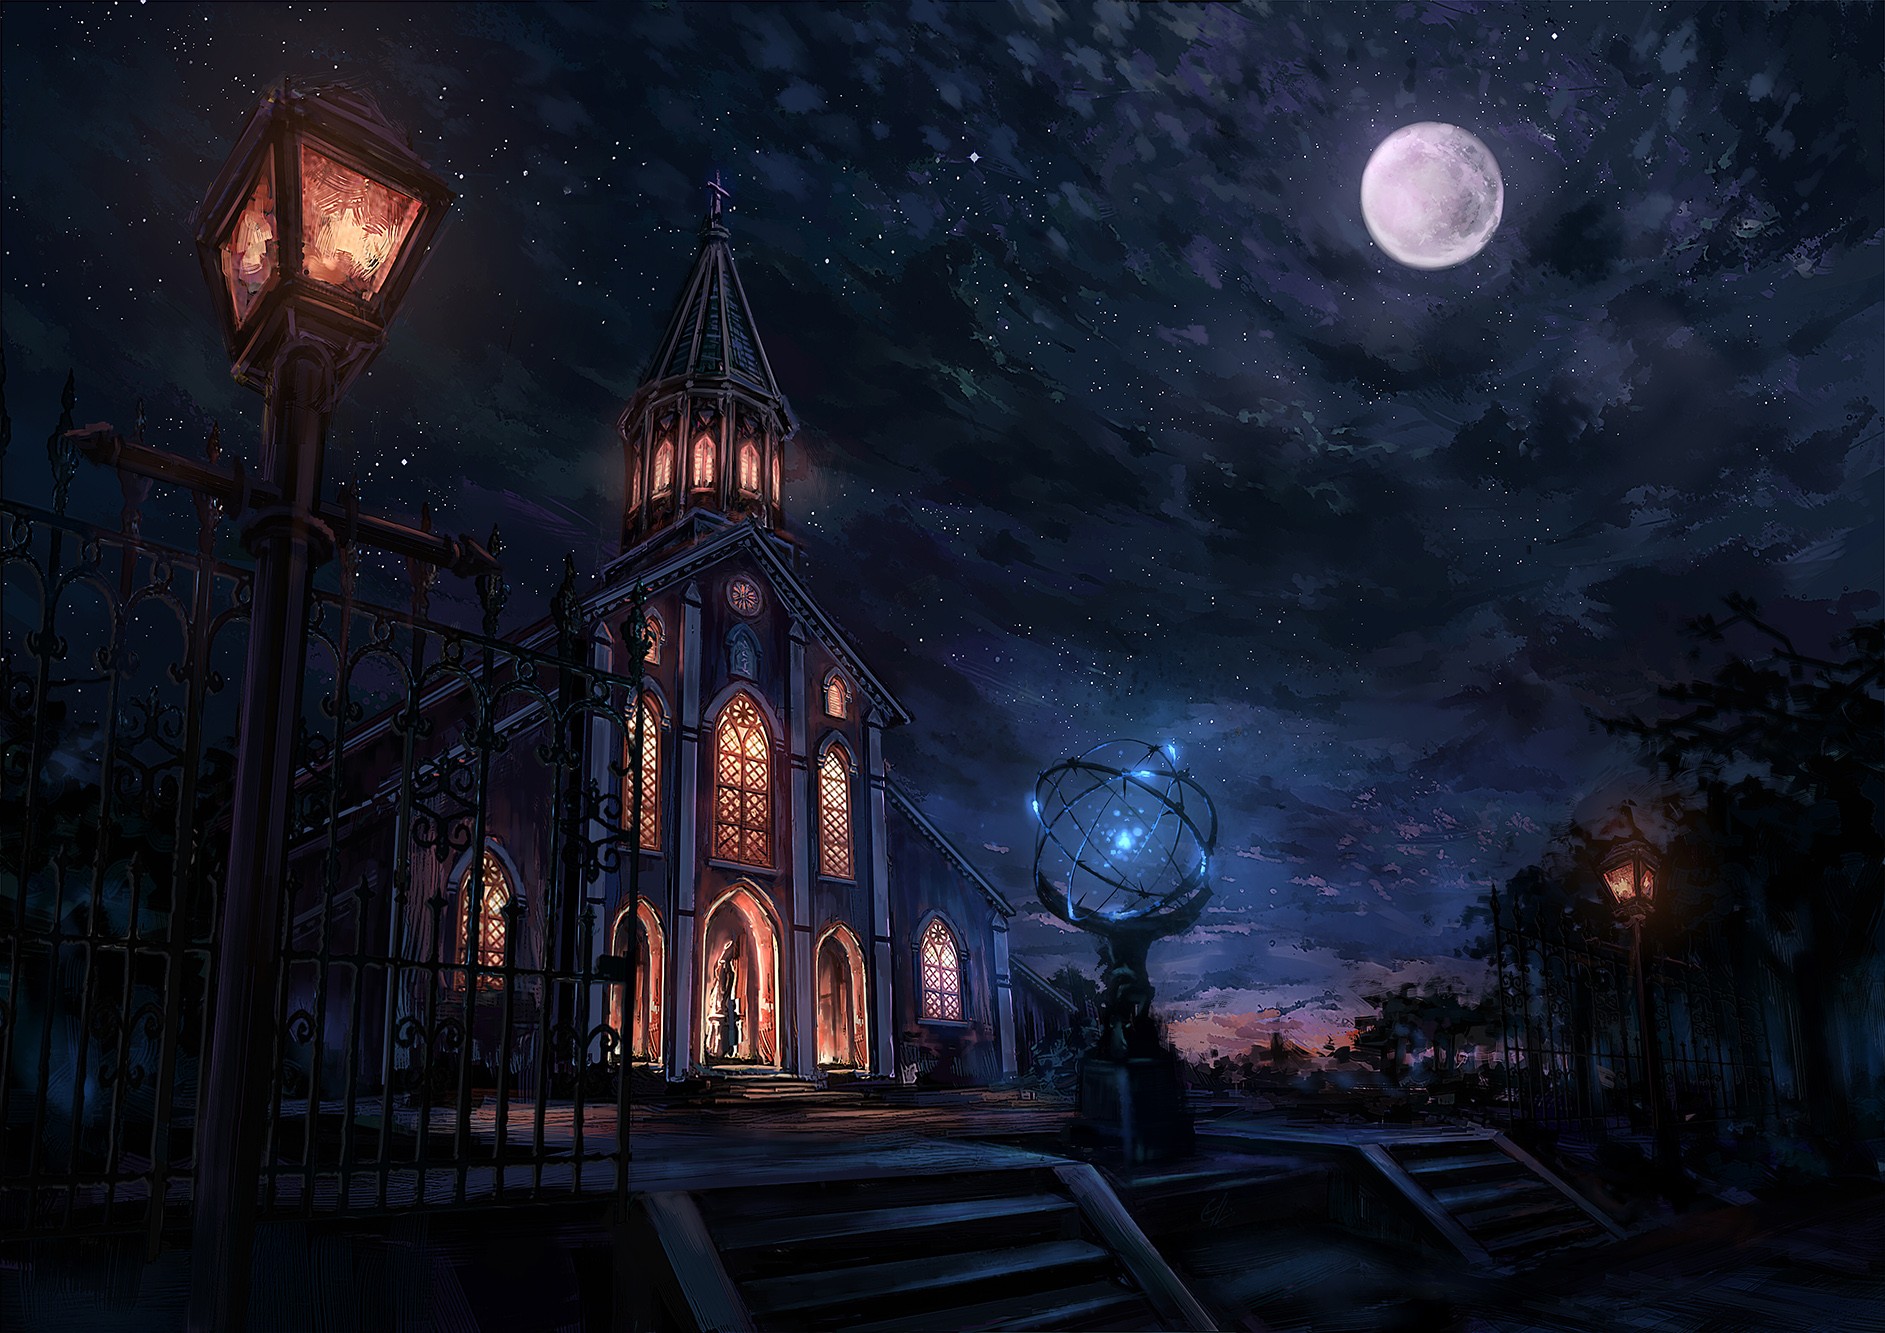 Fatezero Fate Zero Fate Zero Fatestay Fate Stay Fate Stay Castles Anime Architecture Buildings Dark Fantasy Night Wallpapers Hd Desktop And Mobile Backgrounds